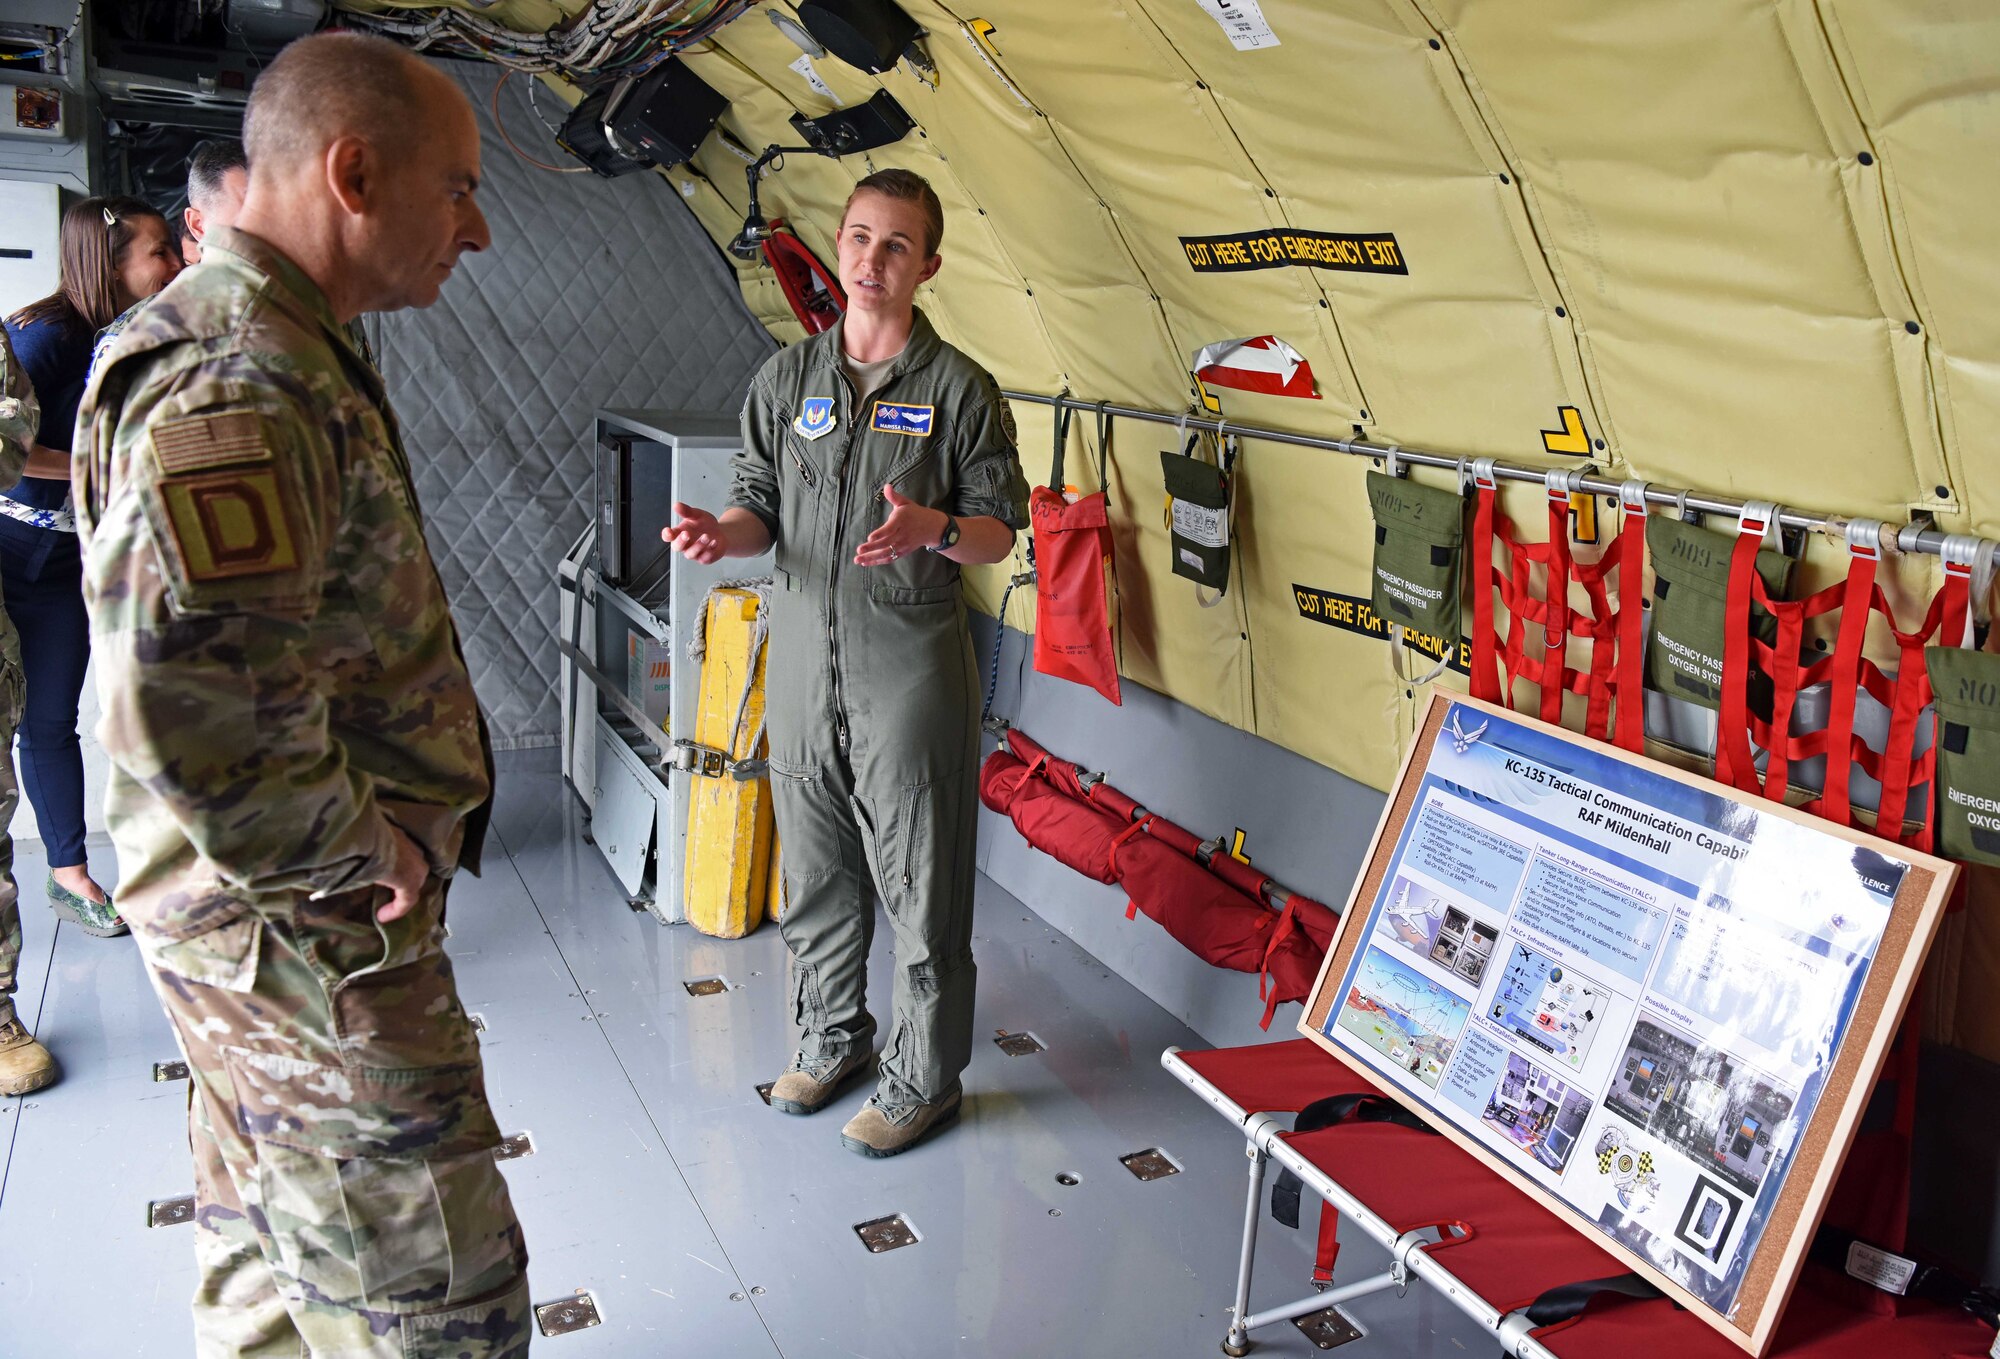 U.S. Air Force Gen. Jeff Harrigian, U.S. Air Forces in Europe – Air Forces Africa commander, receives a KC-135 Stratotanker briefing from Capt. Marissa “Doom” Strauss, 351st Air Refueling Squadron weapons officer, during a visit to RAF Mildenhall, England, July 15, 2019. During the visit, Harrigian introduced his three priorities as USAFE-AFAFRICA commander – readiness, posture and partnerships. (U.S. Air Force photo by Airman 1st Class Brandon Esau)